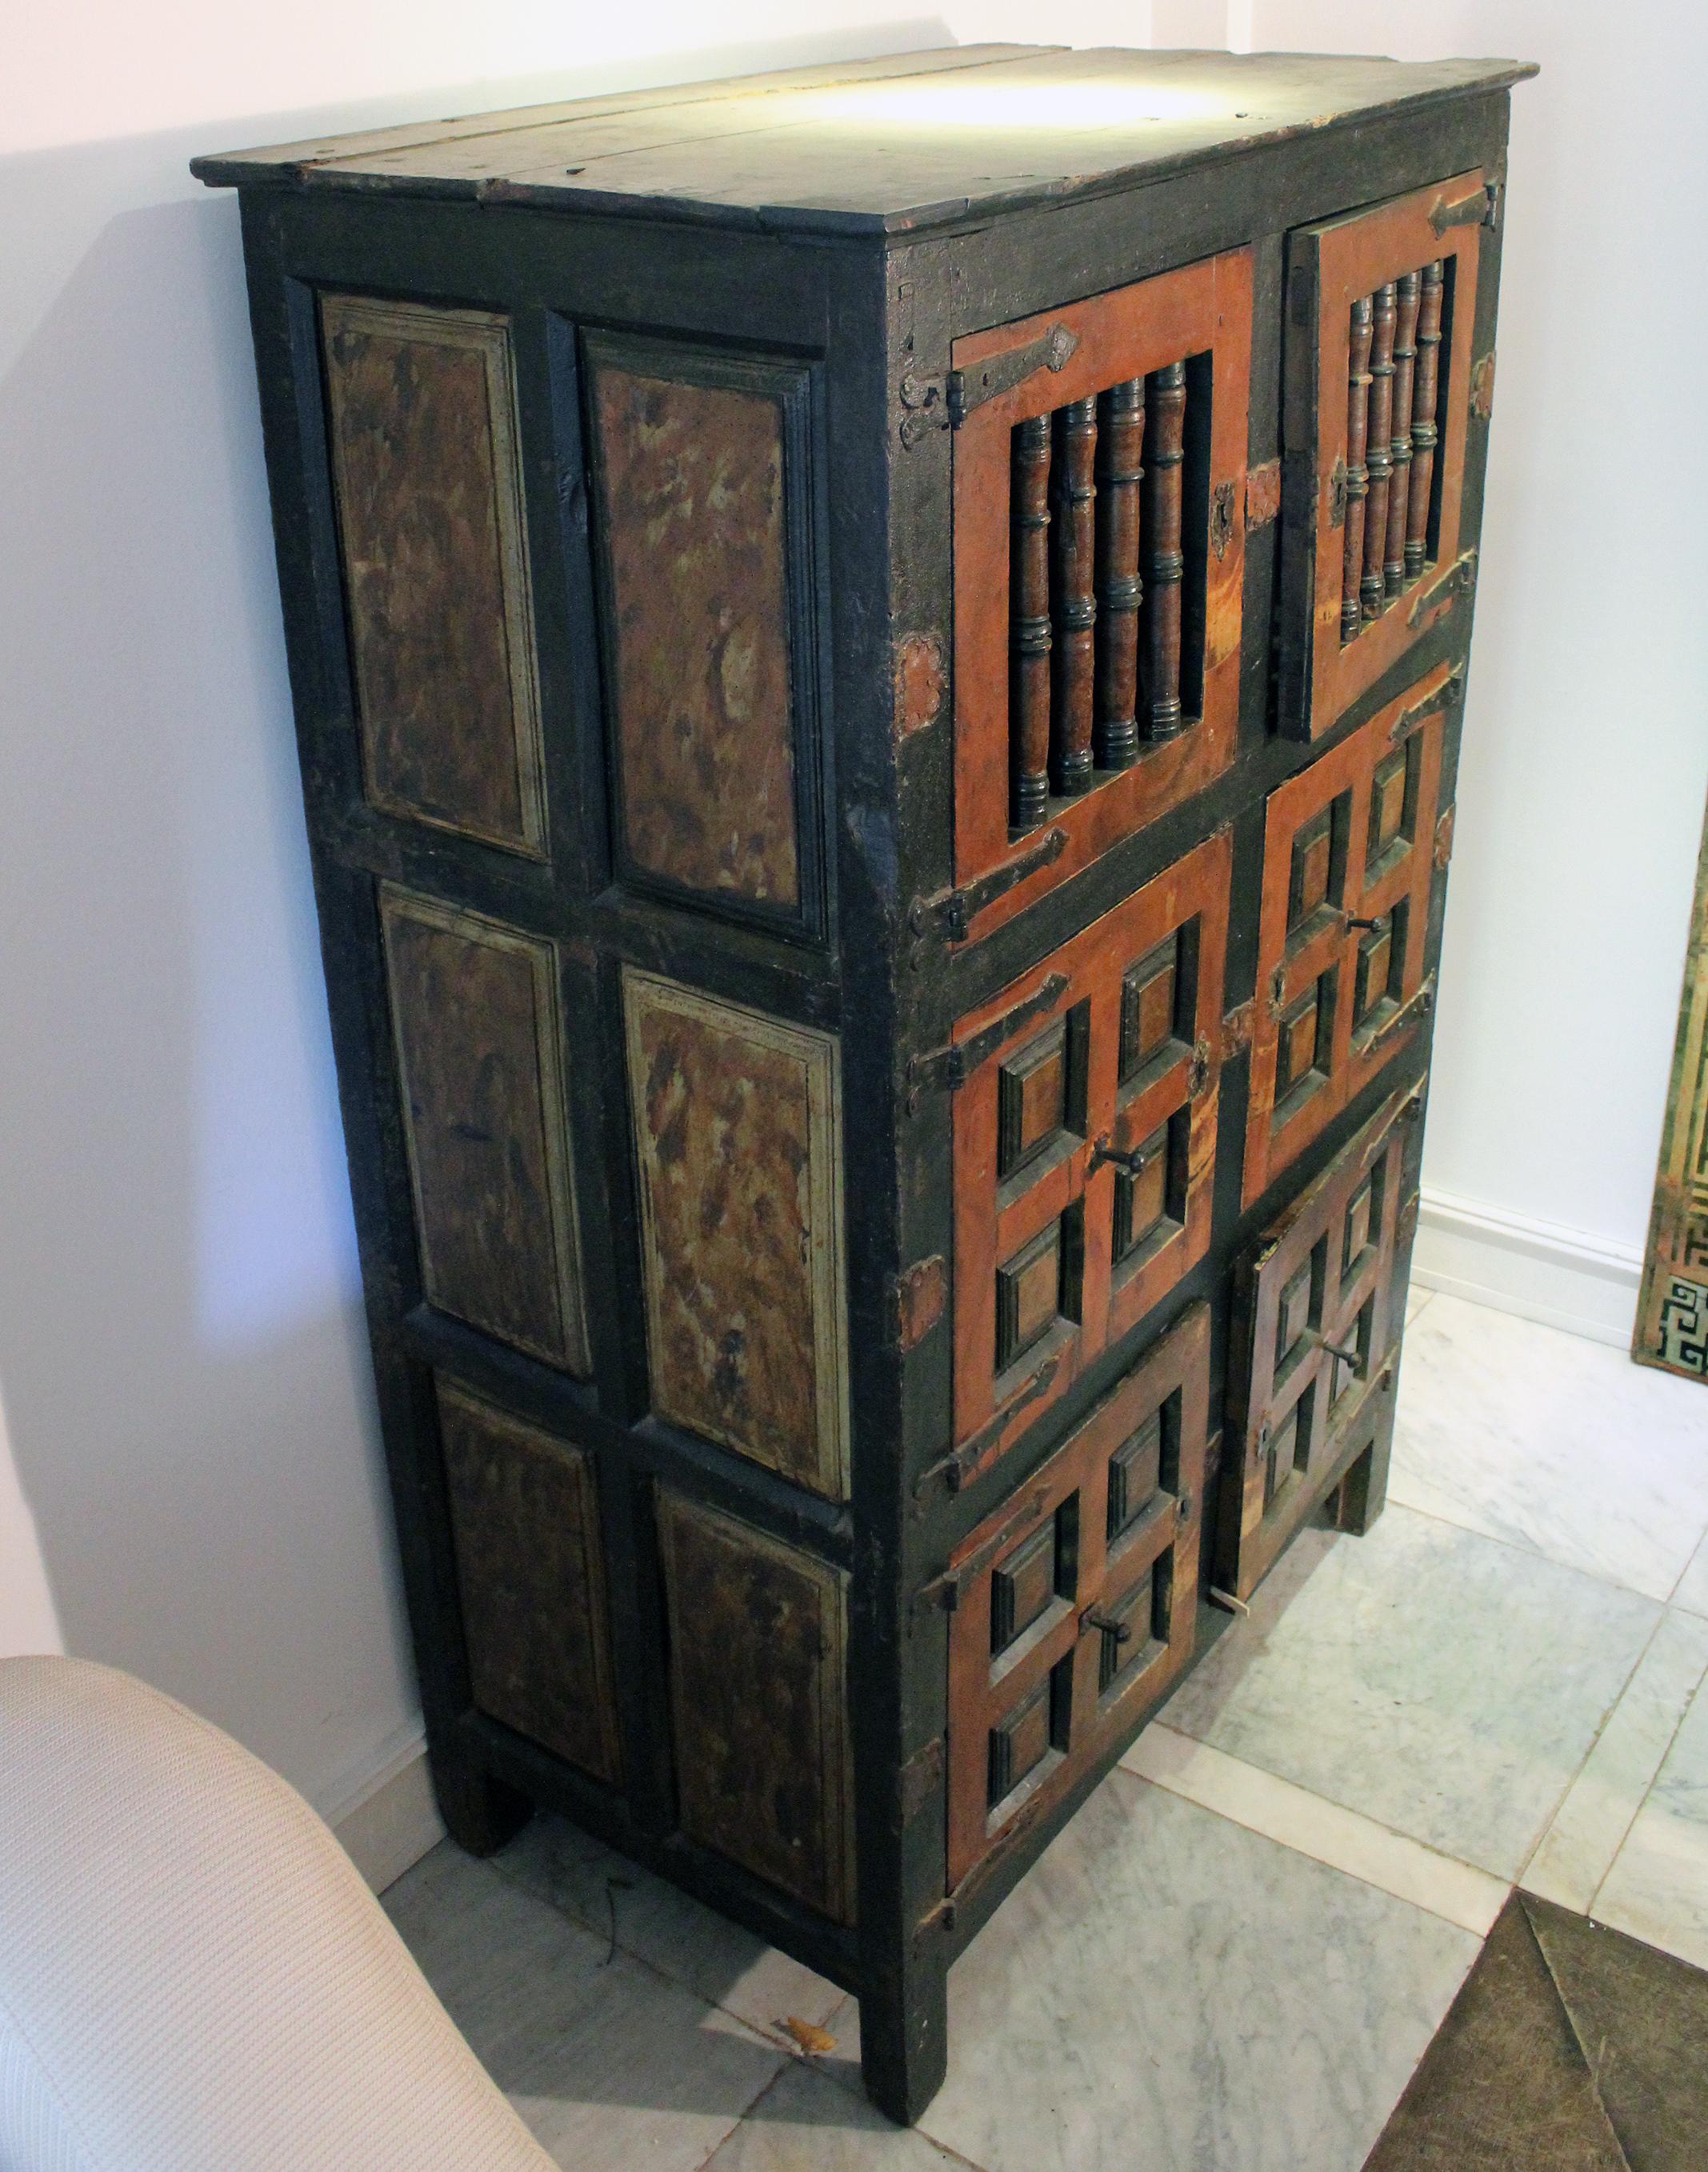 17th Century Spanish Painted Cabinet with Original Doors, Locks and Fittings (Spanisch)